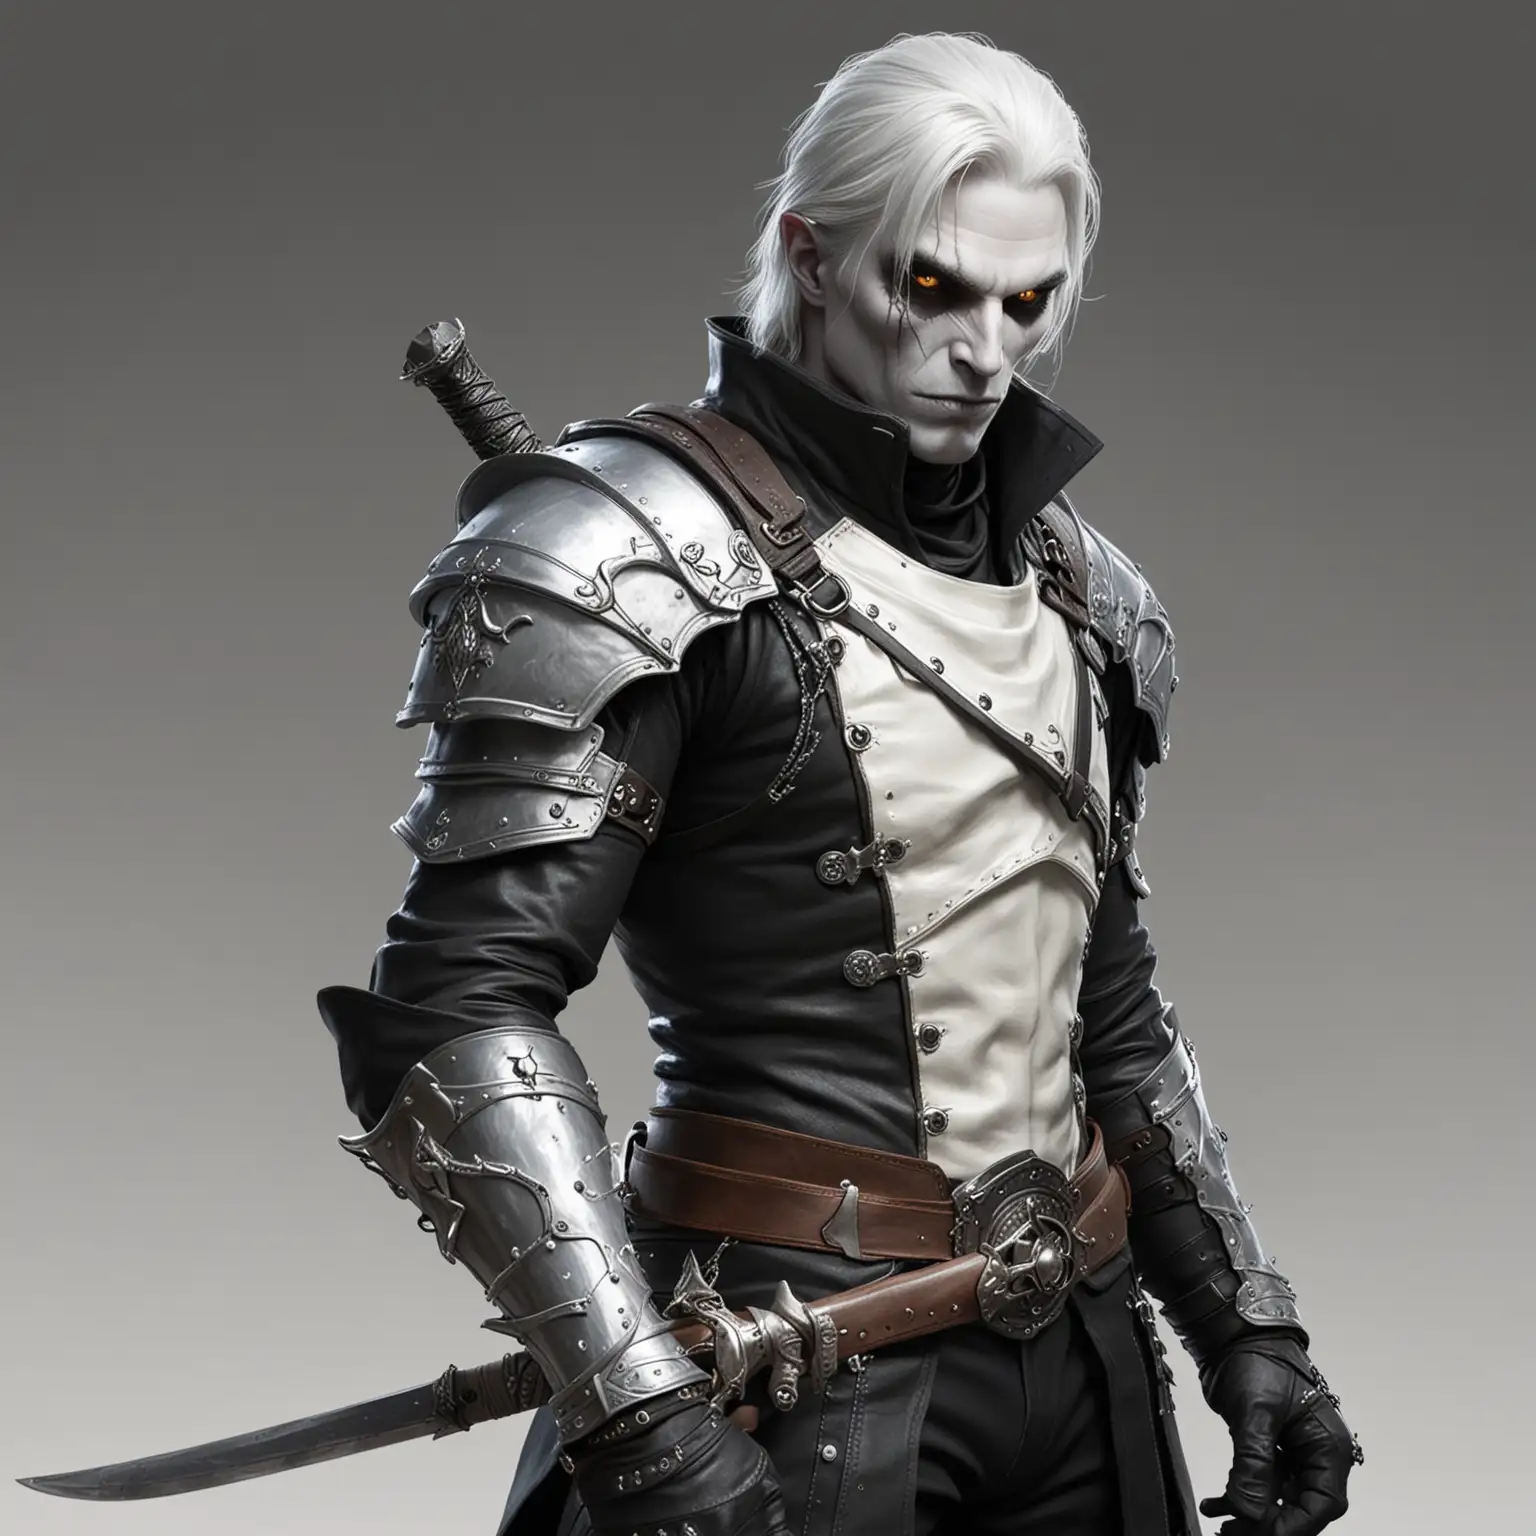 Ghoulish Fantasy Rogue in Black Leather Armor Wielding a Rapier